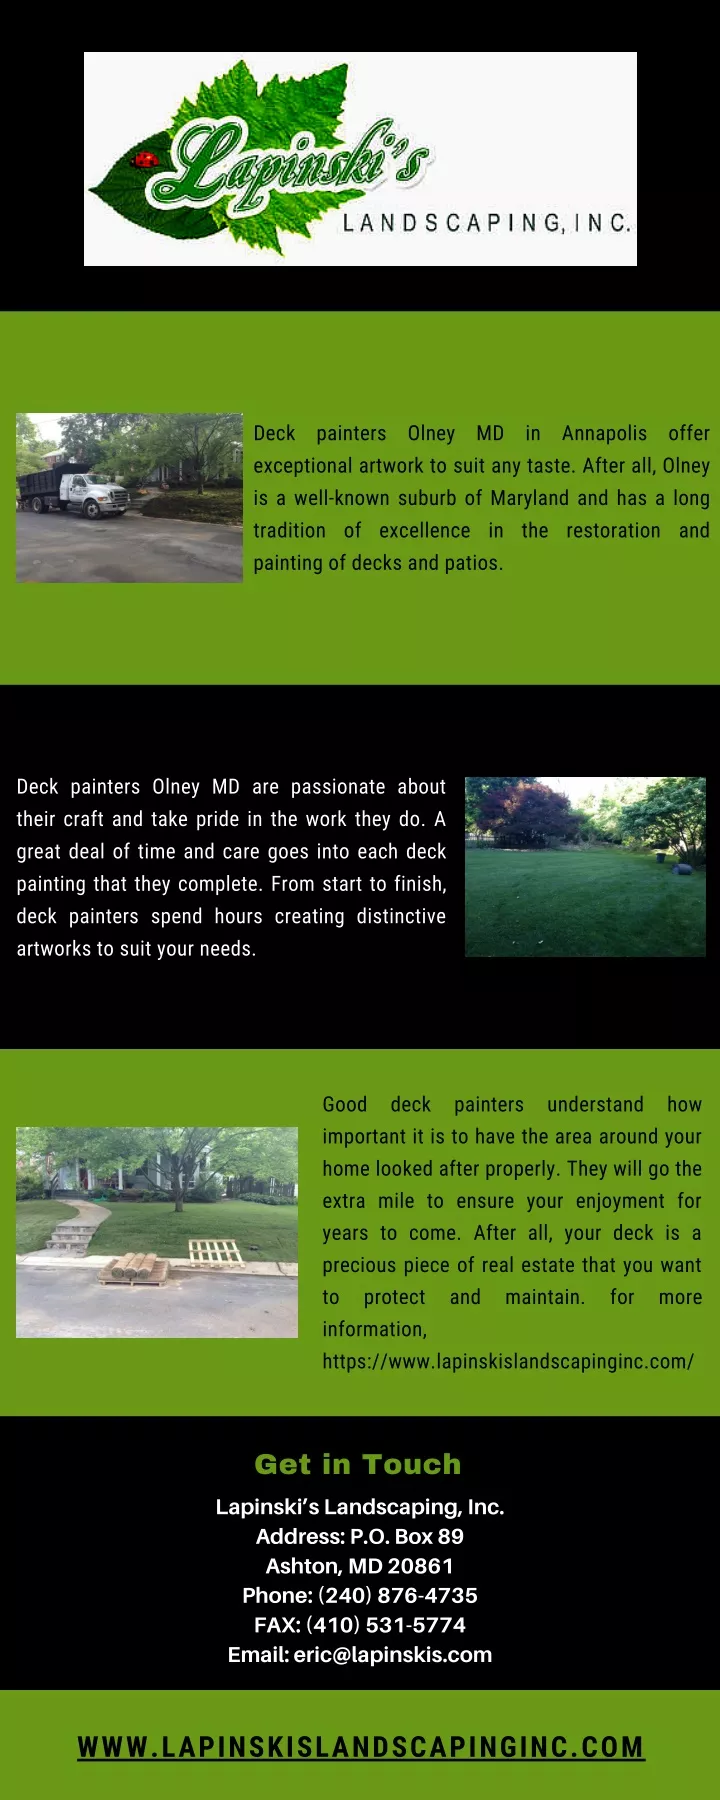 deck painters olney md in annapolis offer